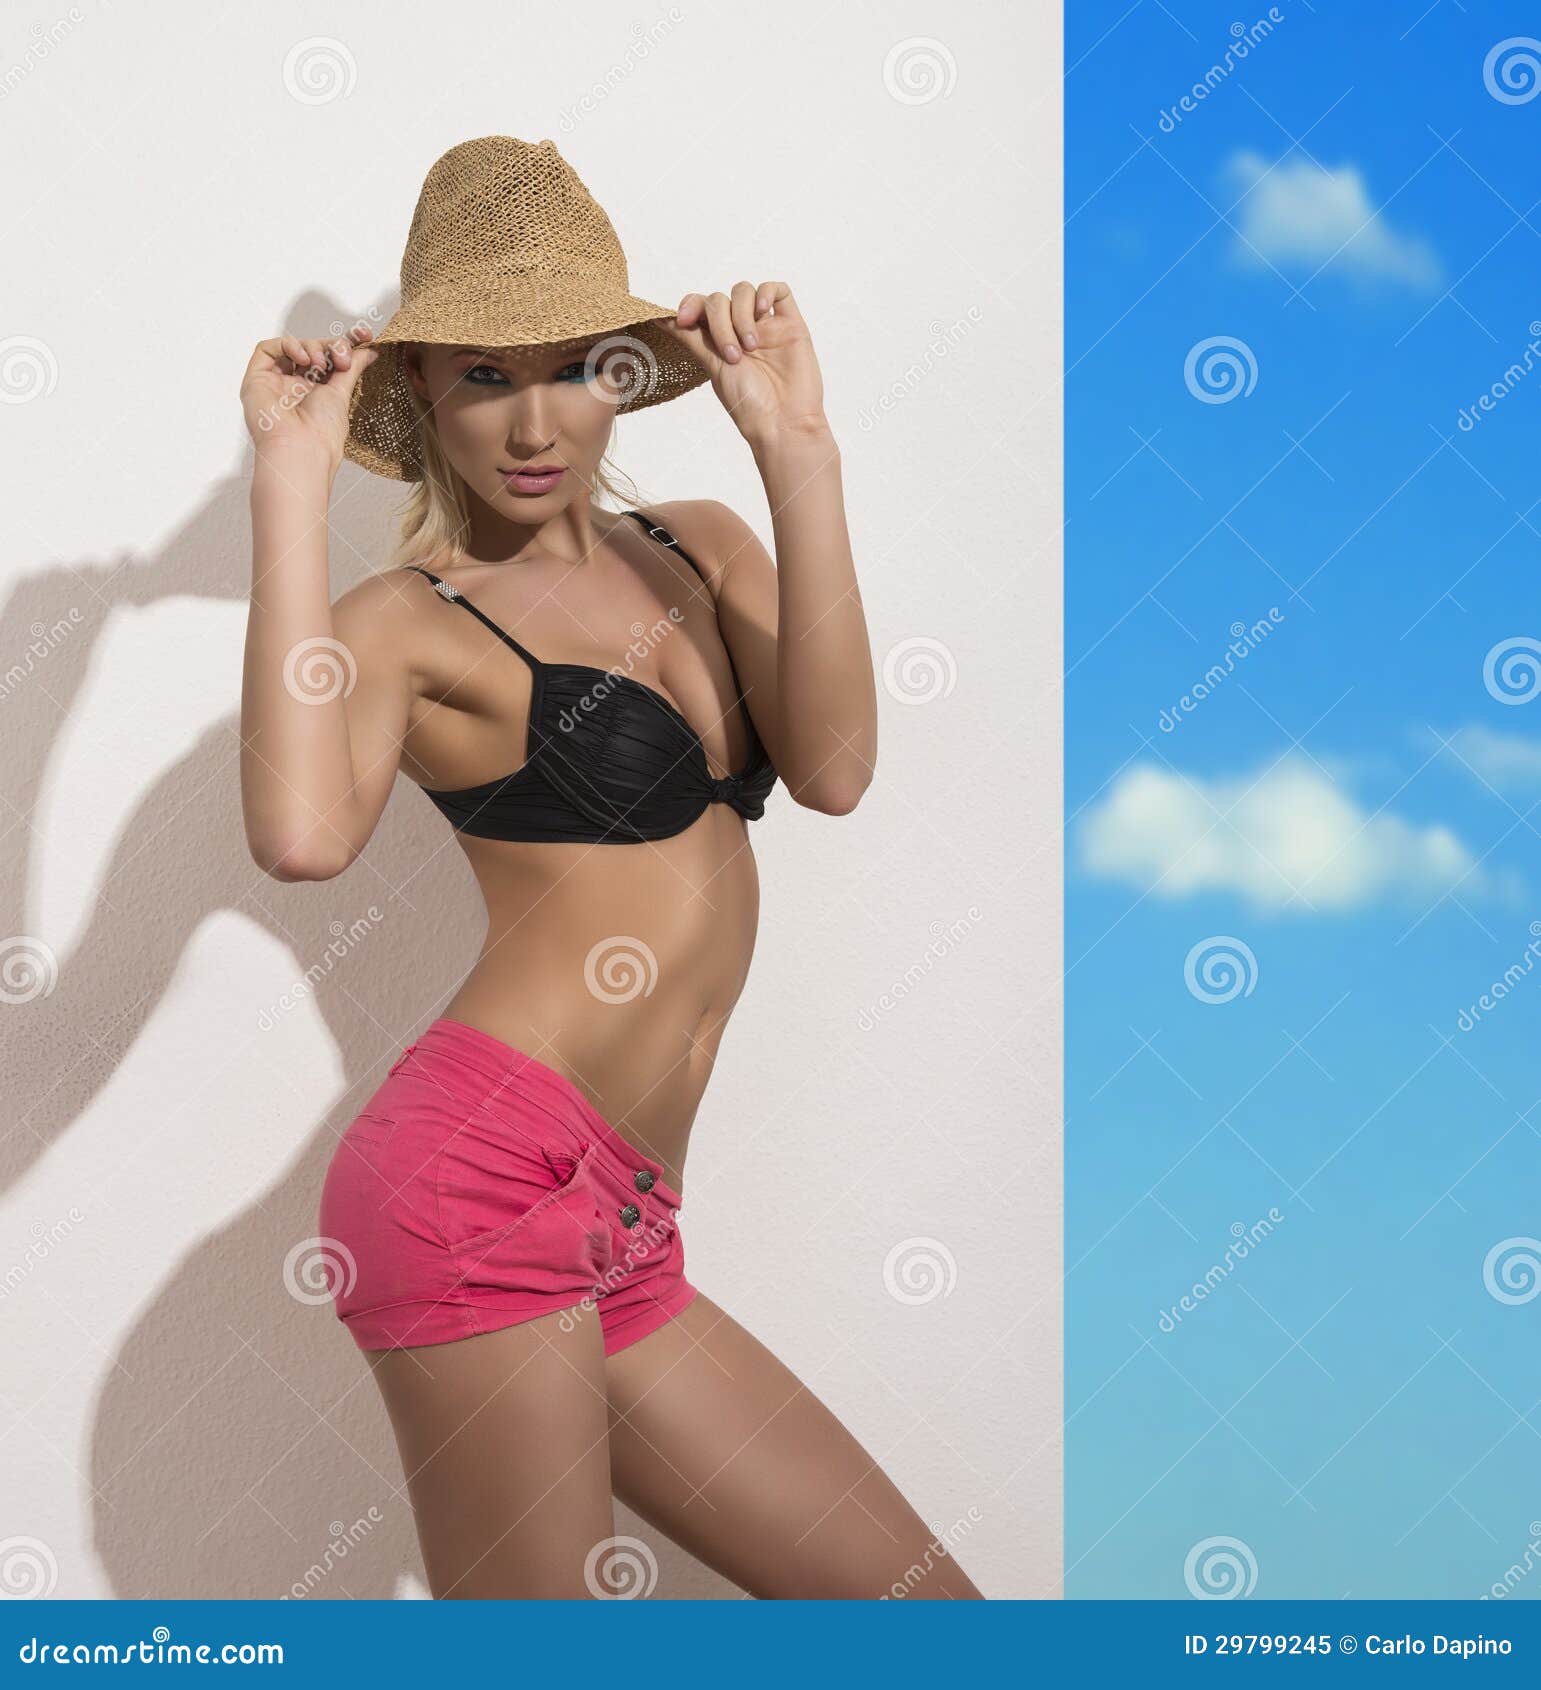 https://thumbs.dreamstime.com/z/sexy-blonde-girl-straw-hat-black-bra-pink-shorts-looks-to-lens-touches-hat-both-hands-29799245.jpg